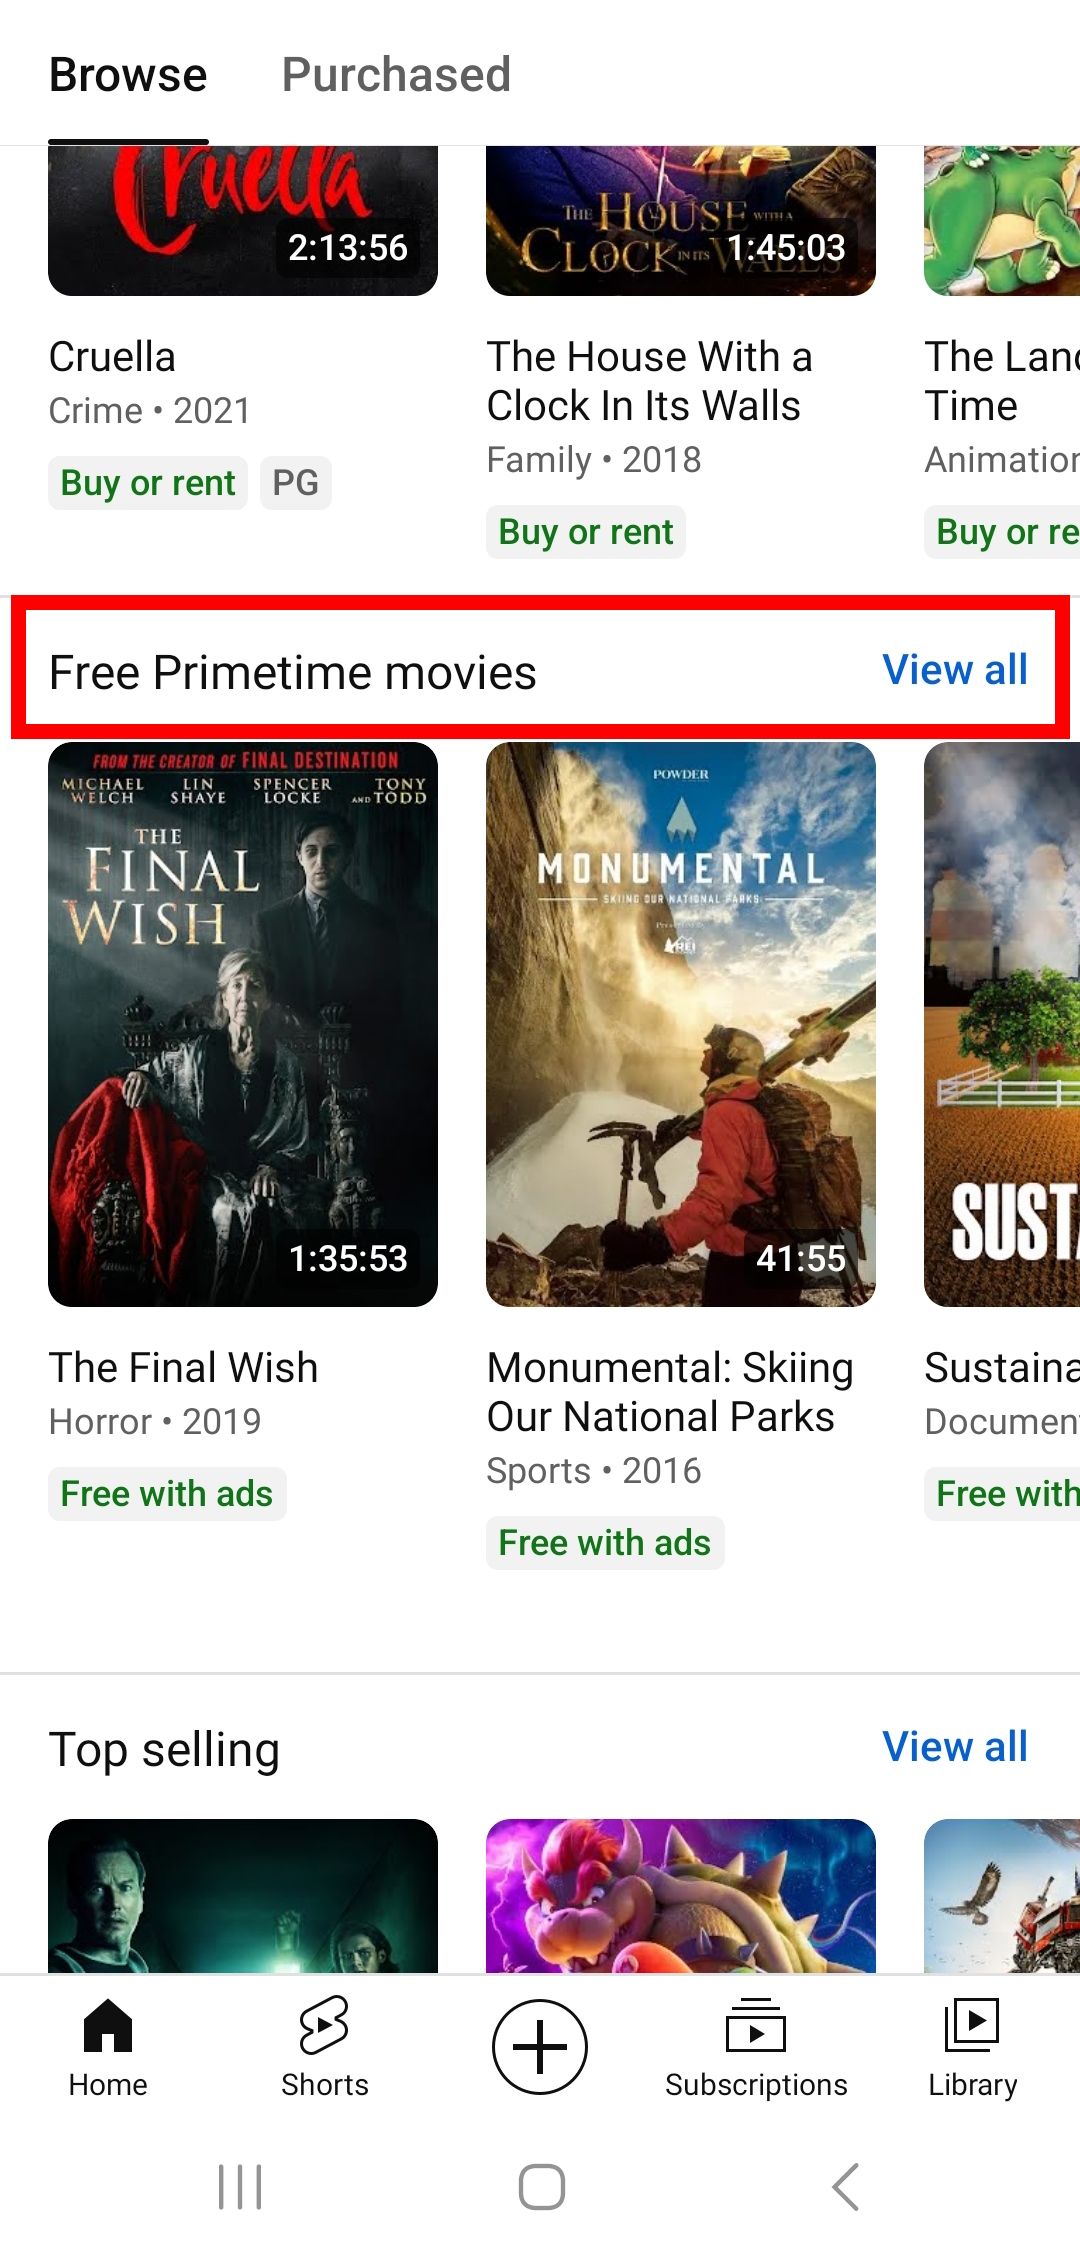 Red rectangle outline over Free Primetime movies and view all button on the YouTube app